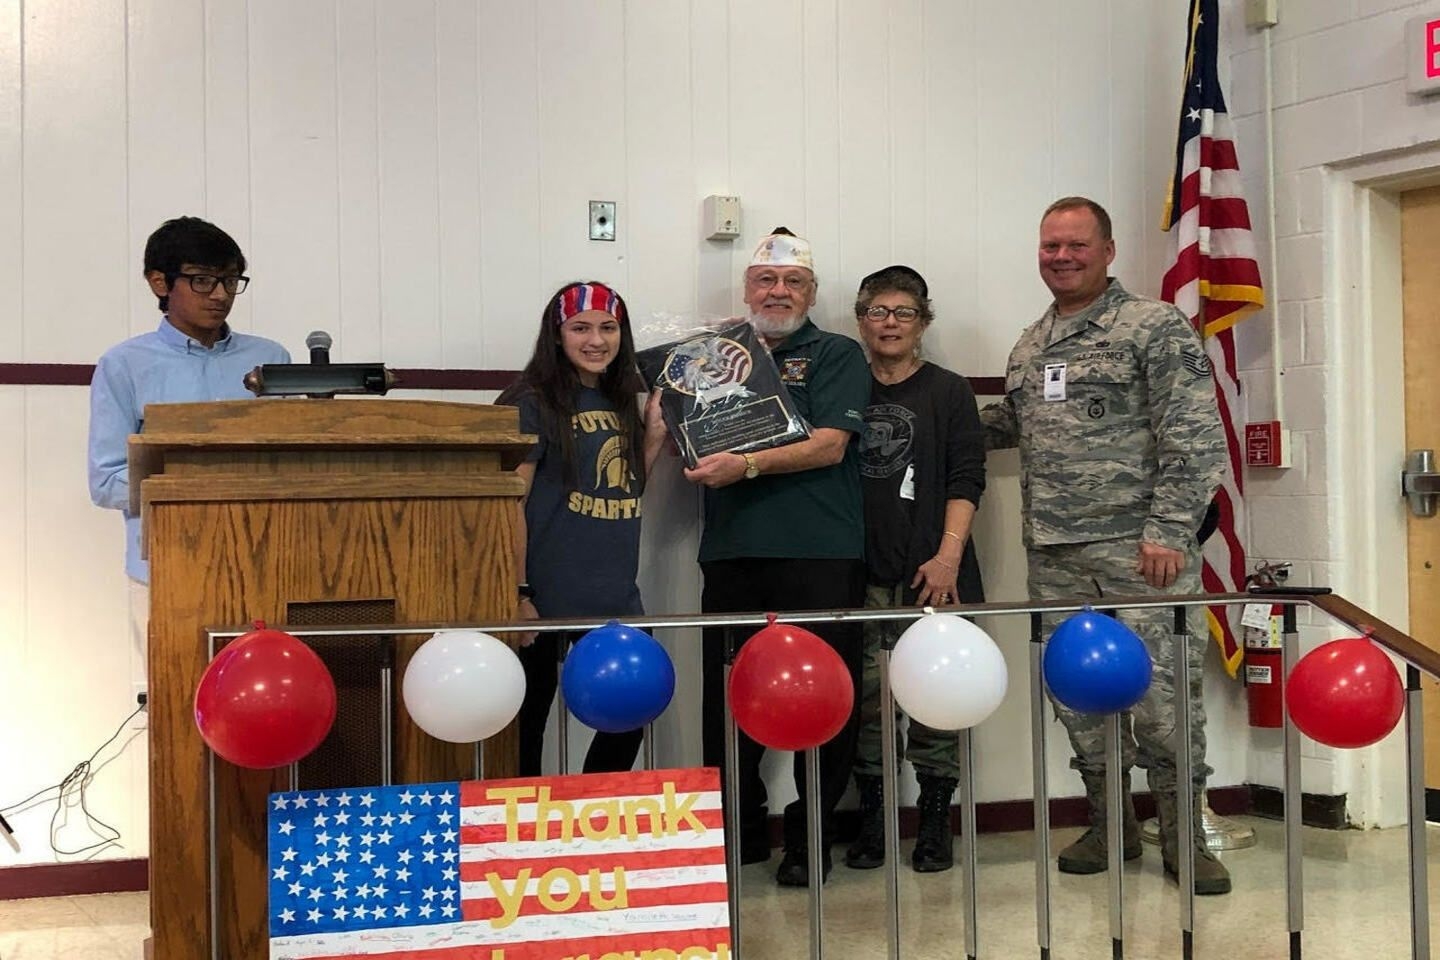 Quartermaster Emmick receives plaque for years of maintaining a close link between the VFW and VECC